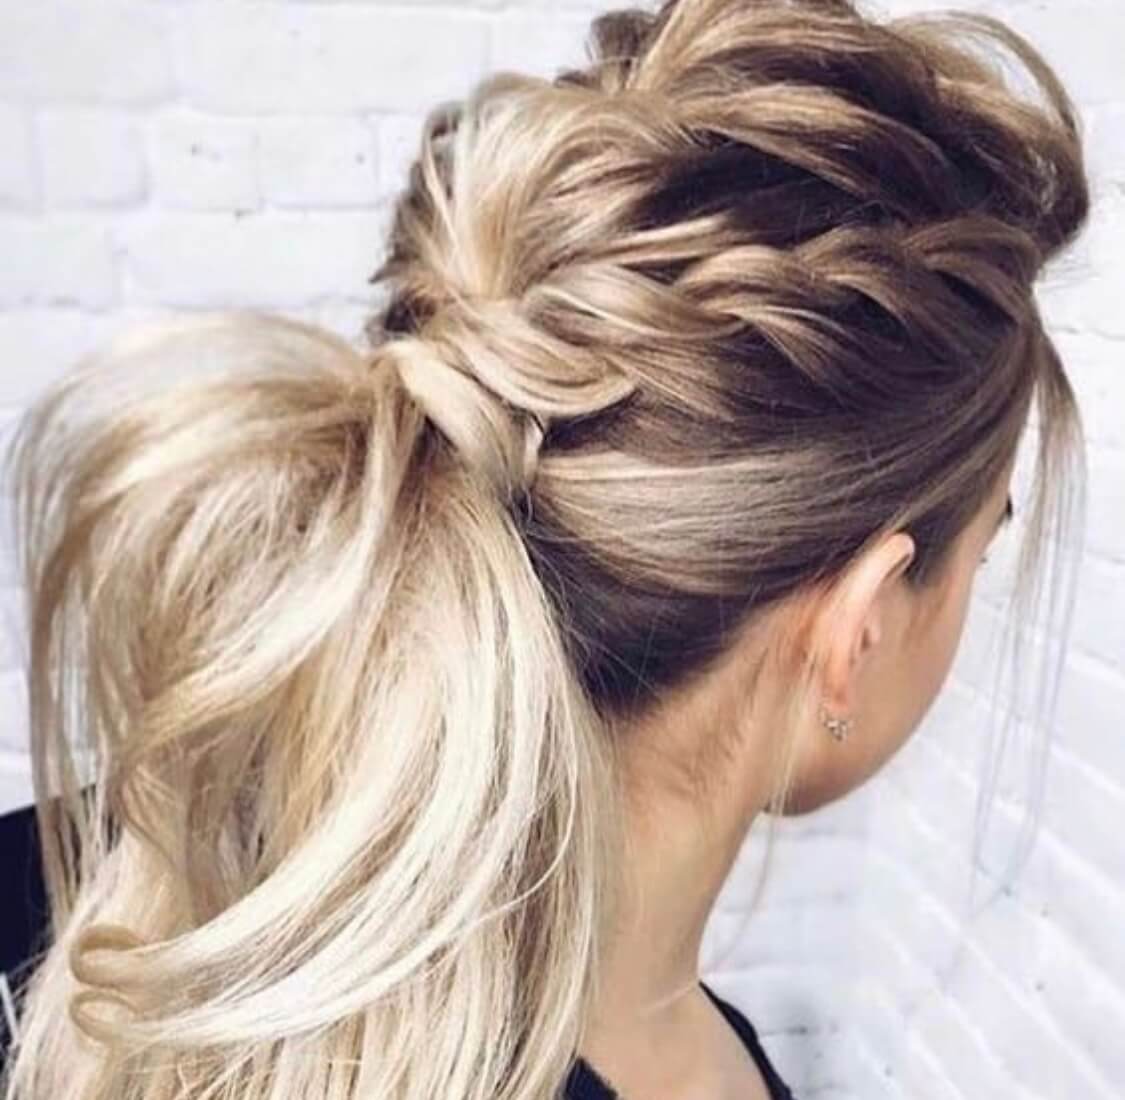 Celebrity hairstyle, ideas for a haircut, long blonde hair ideas, short blonde hair ideas, curly hair, straight hair, waves, curls, messy hair, bangs, hair inspiration, hairstyles for thin hair, hairstyles for short hair, hairstyles for long hair, blonde hairstyle, going blonde, blonde curls, blonde messy hair, blonde hair inspiration, long blonde hair, blonde celebrity hairstyles,blonde waves, blonde messy hair, hair care, wedding hairstyles and makeup, wedding hairstyles, christmas hairstyles